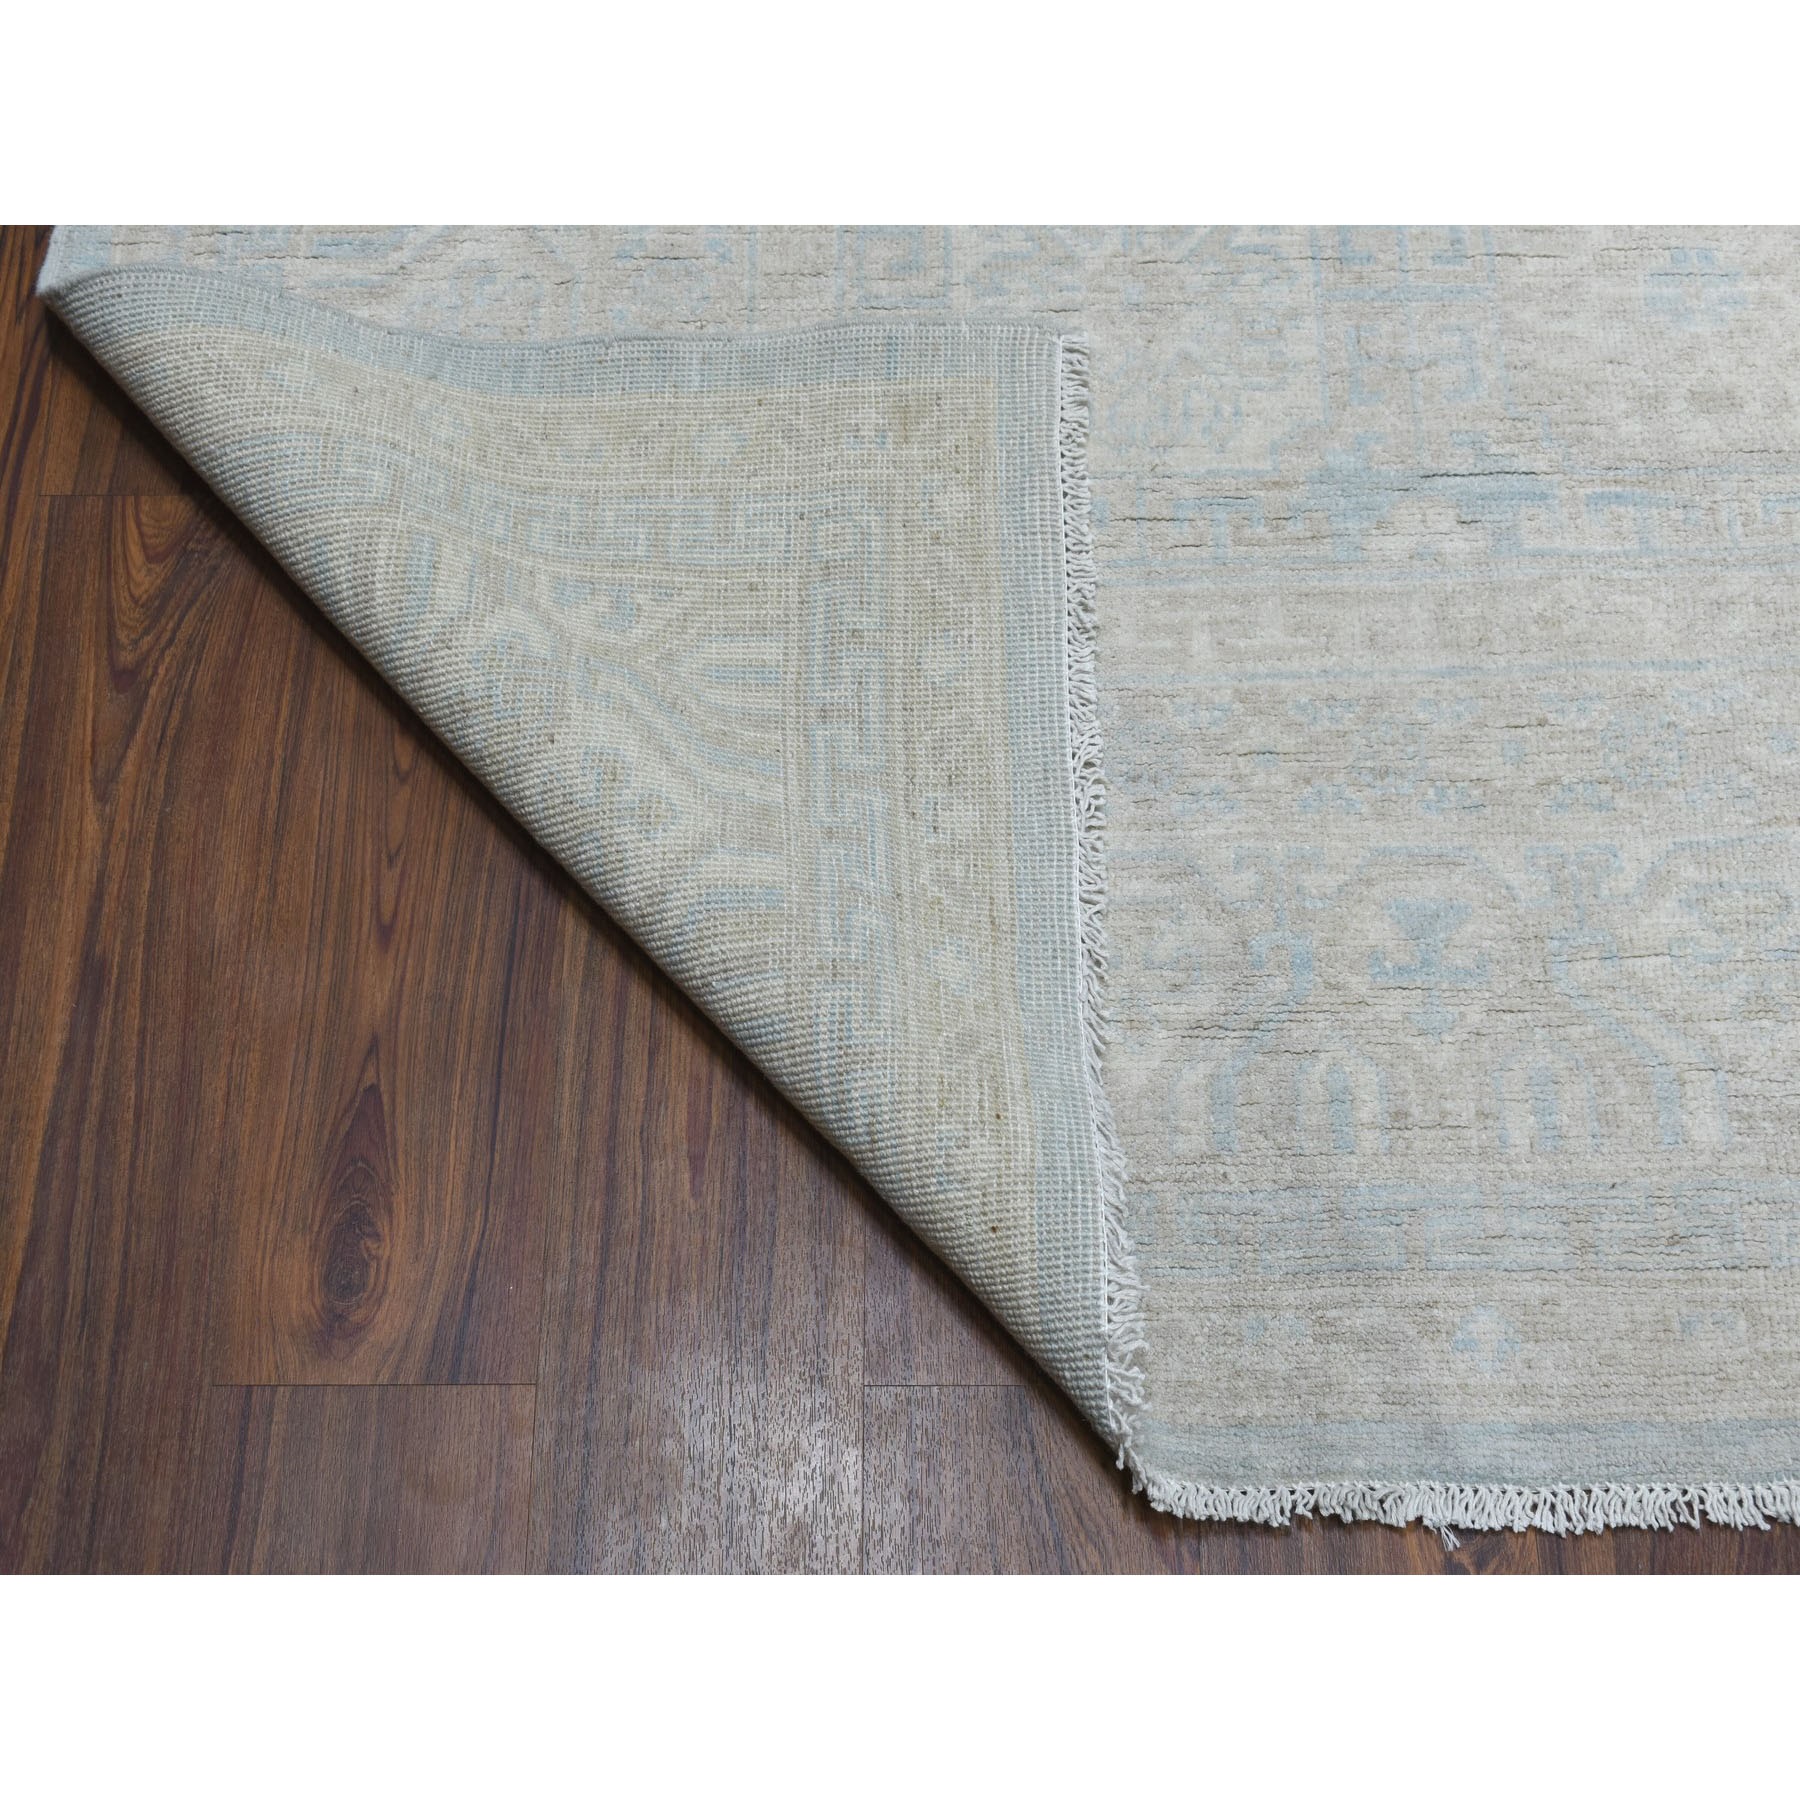 9-x11-4  Samarkand With Khotan Repetitive Rossets Design Hand Knotted Oriental Rug 